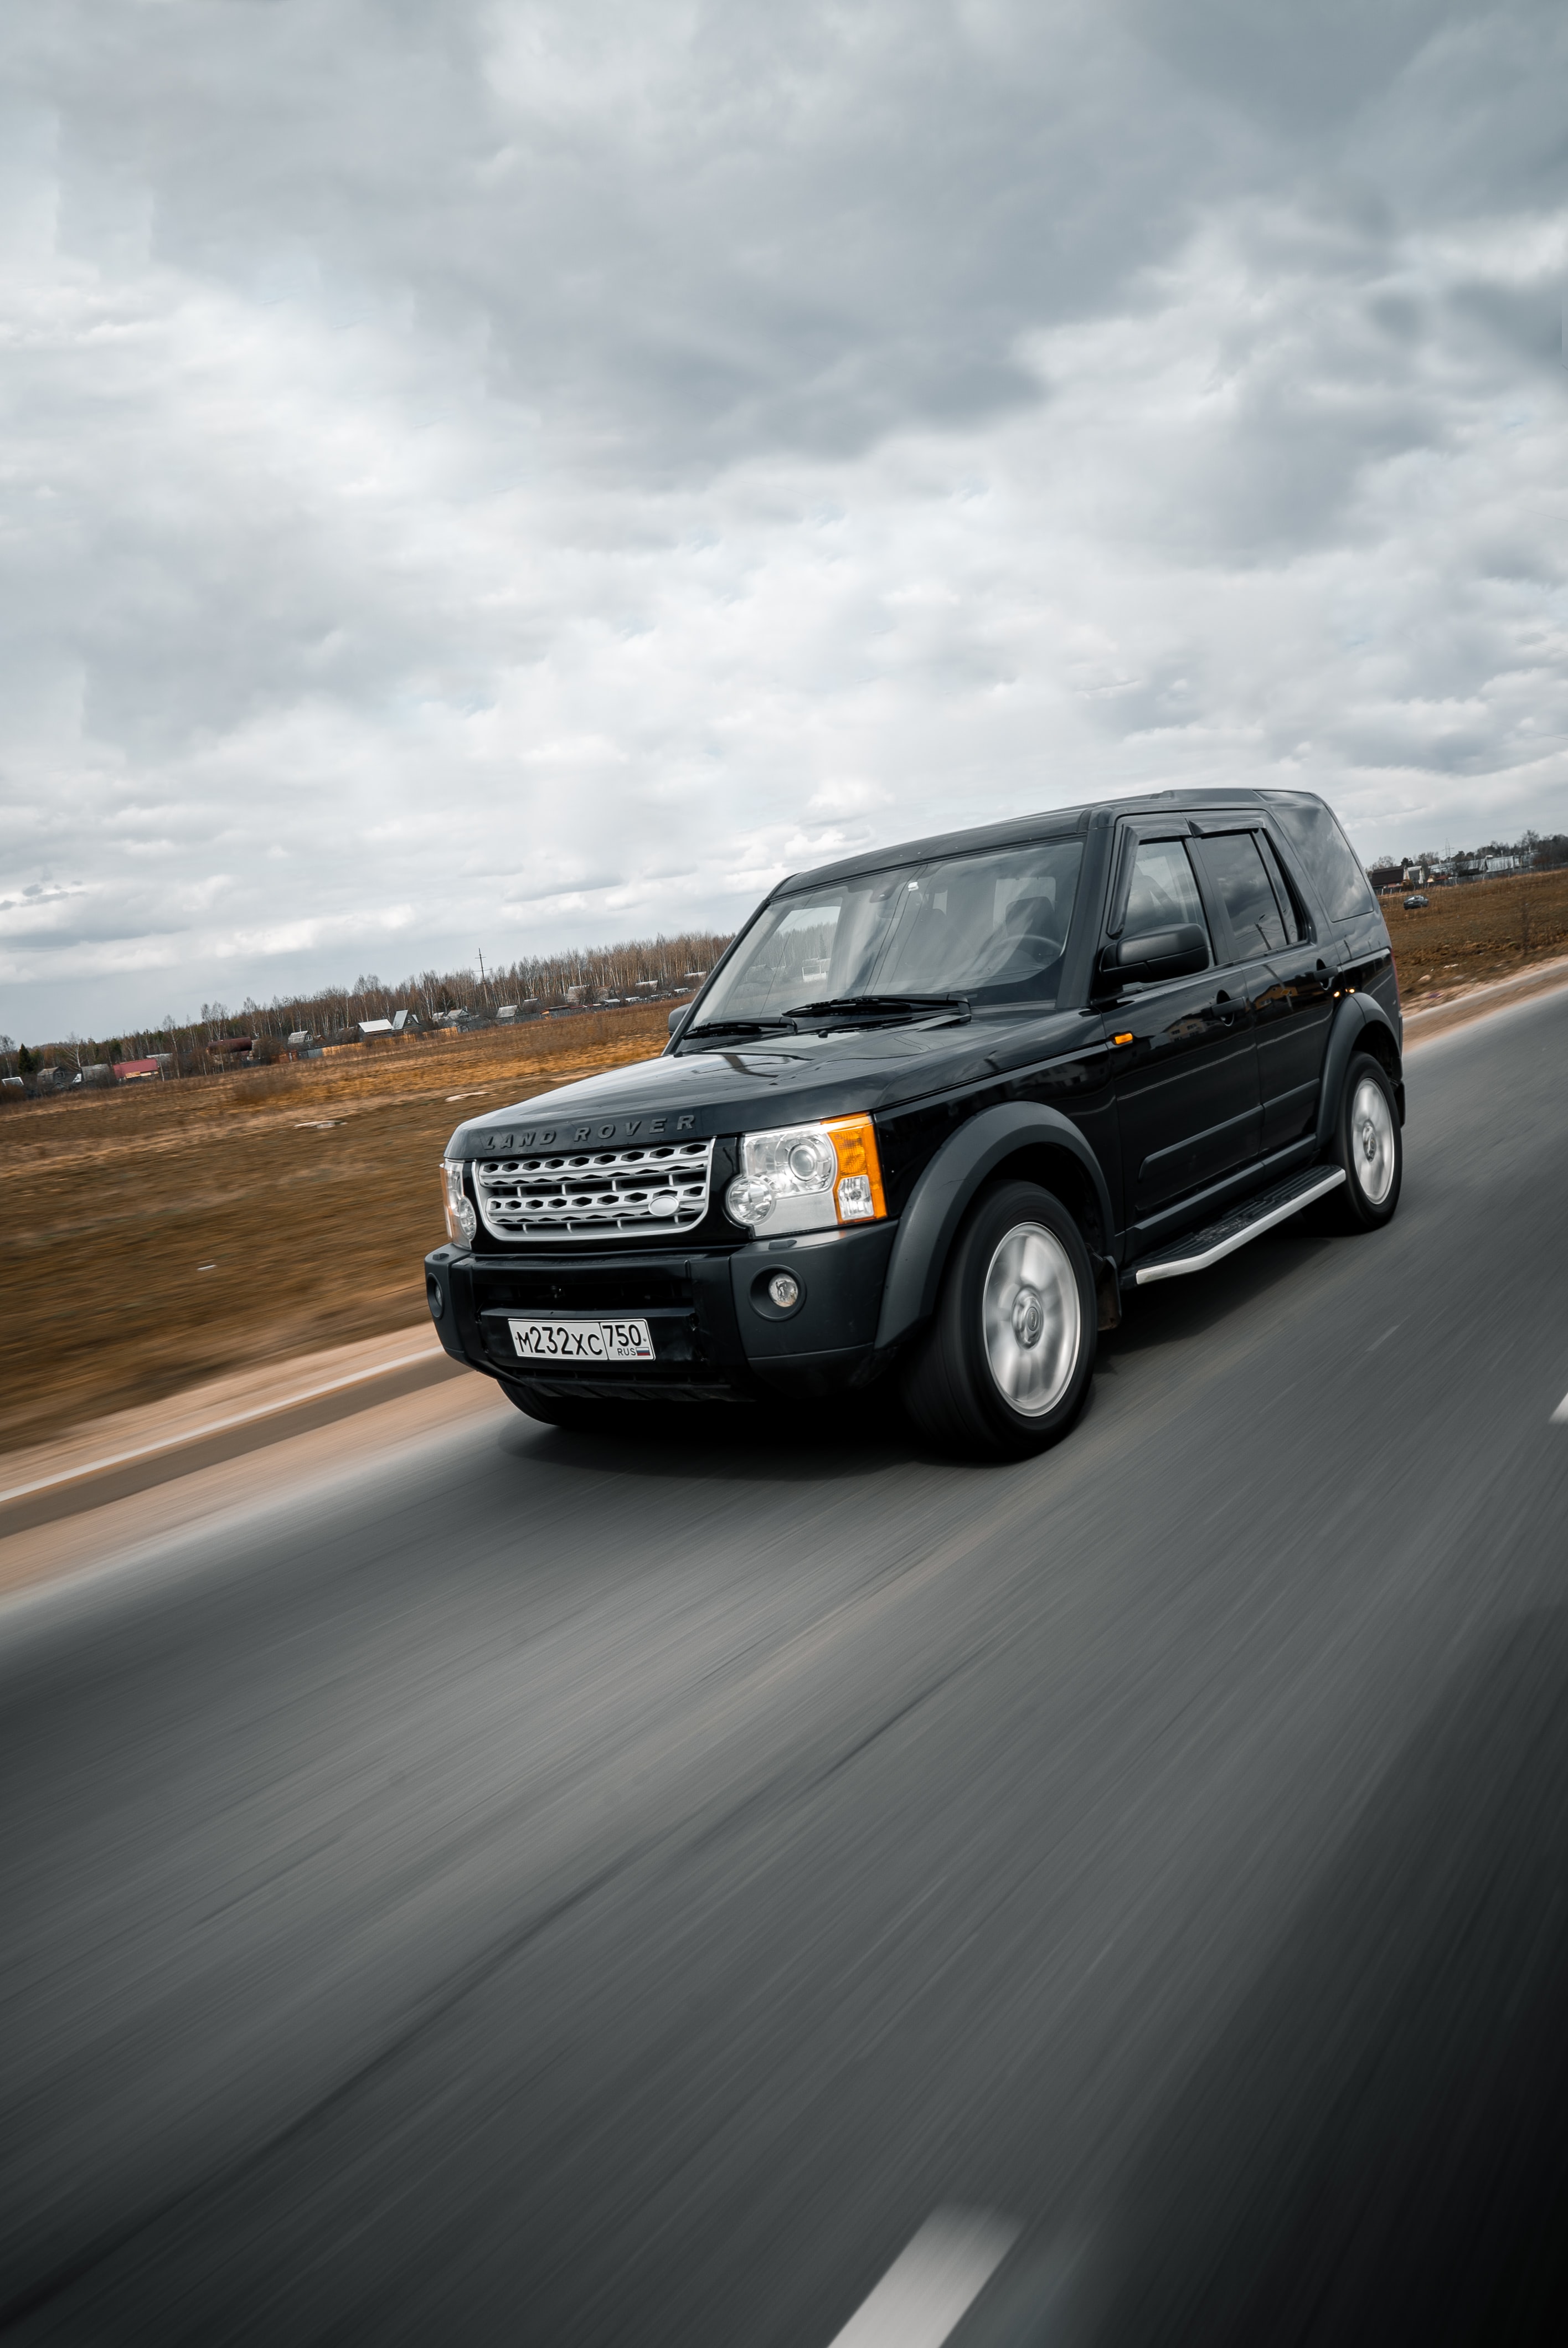 32k Wallpaper Speed jeep, land rover, cars, land rover discovery 3